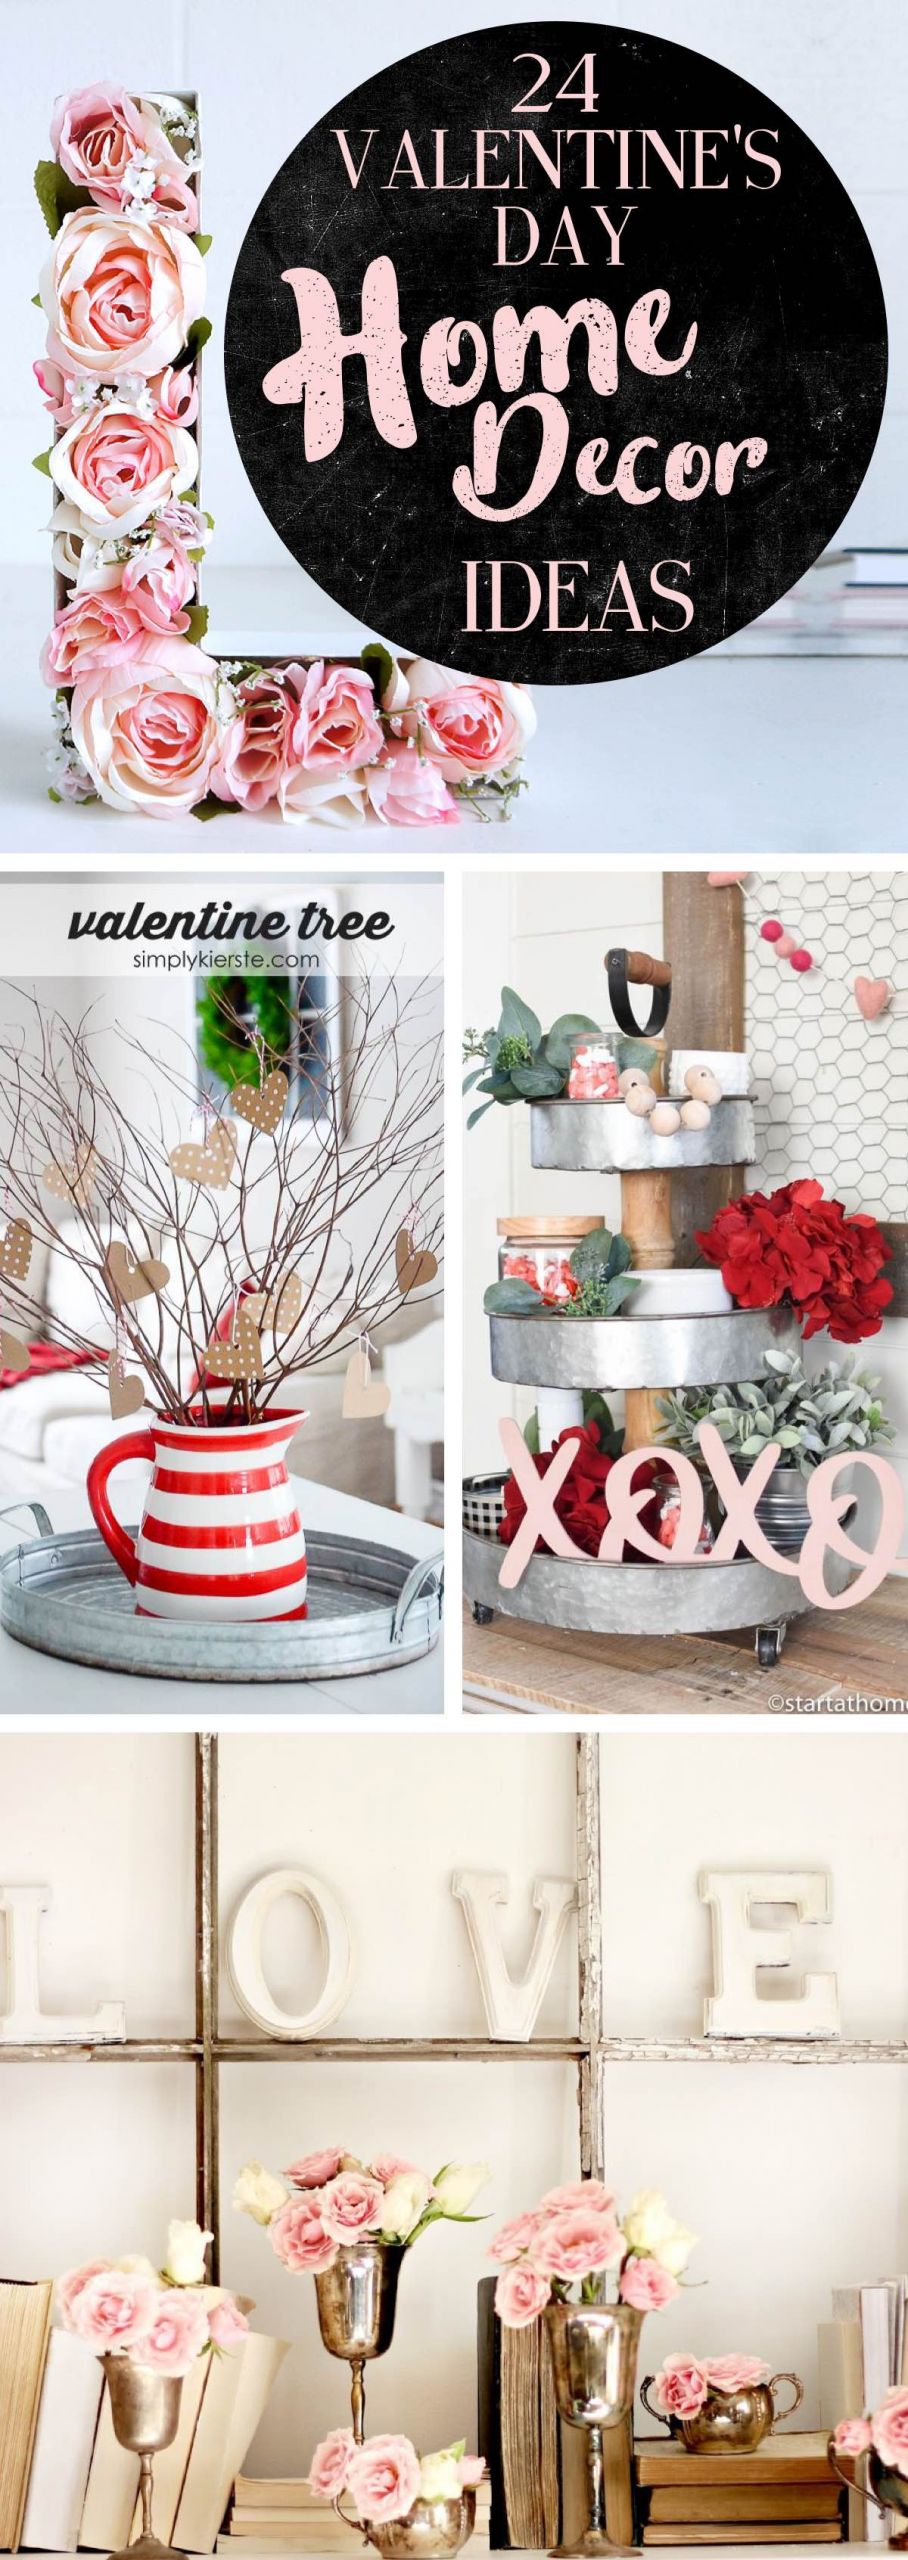 At Home Valentines Day Ideas
 24 Valentine s Day Home Decor Ideas To Win Over The Hearts